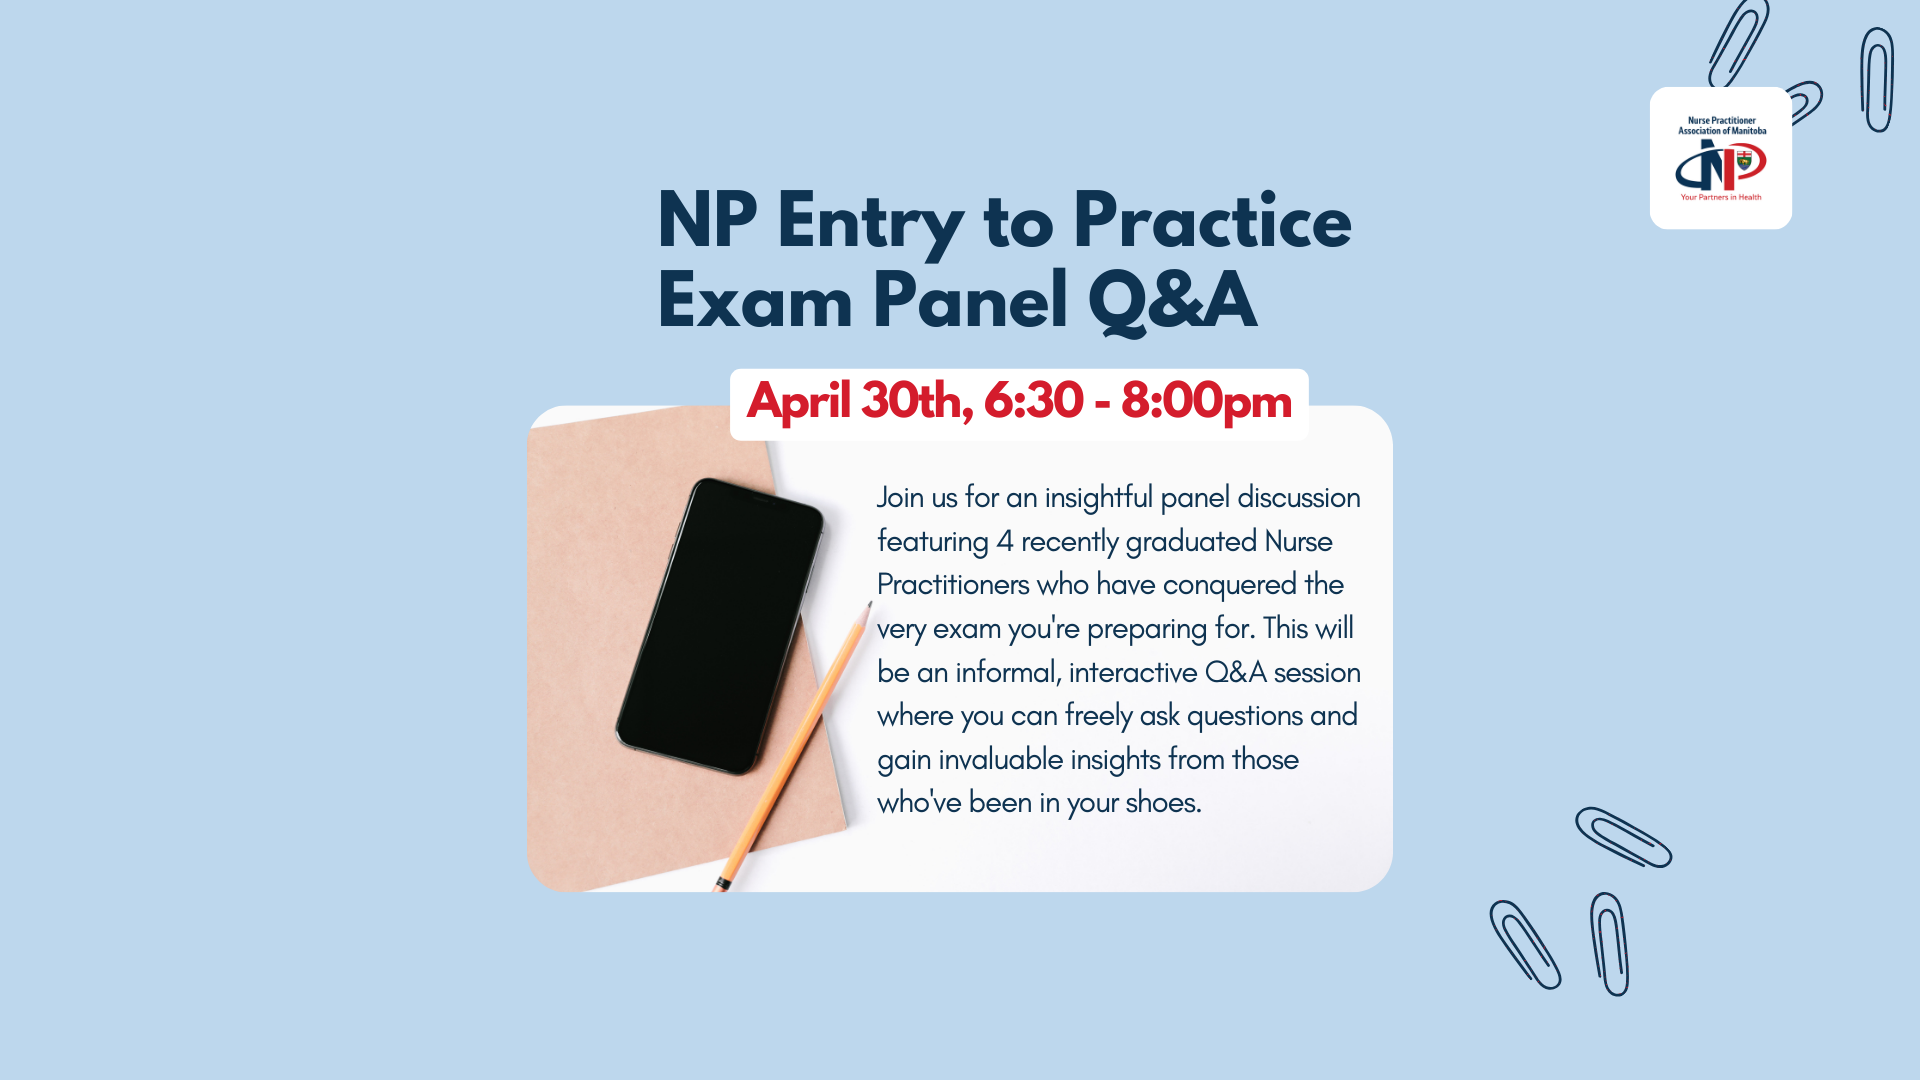 NPAM Education Event: Entry to Practice Exam - NP expert panel discussion